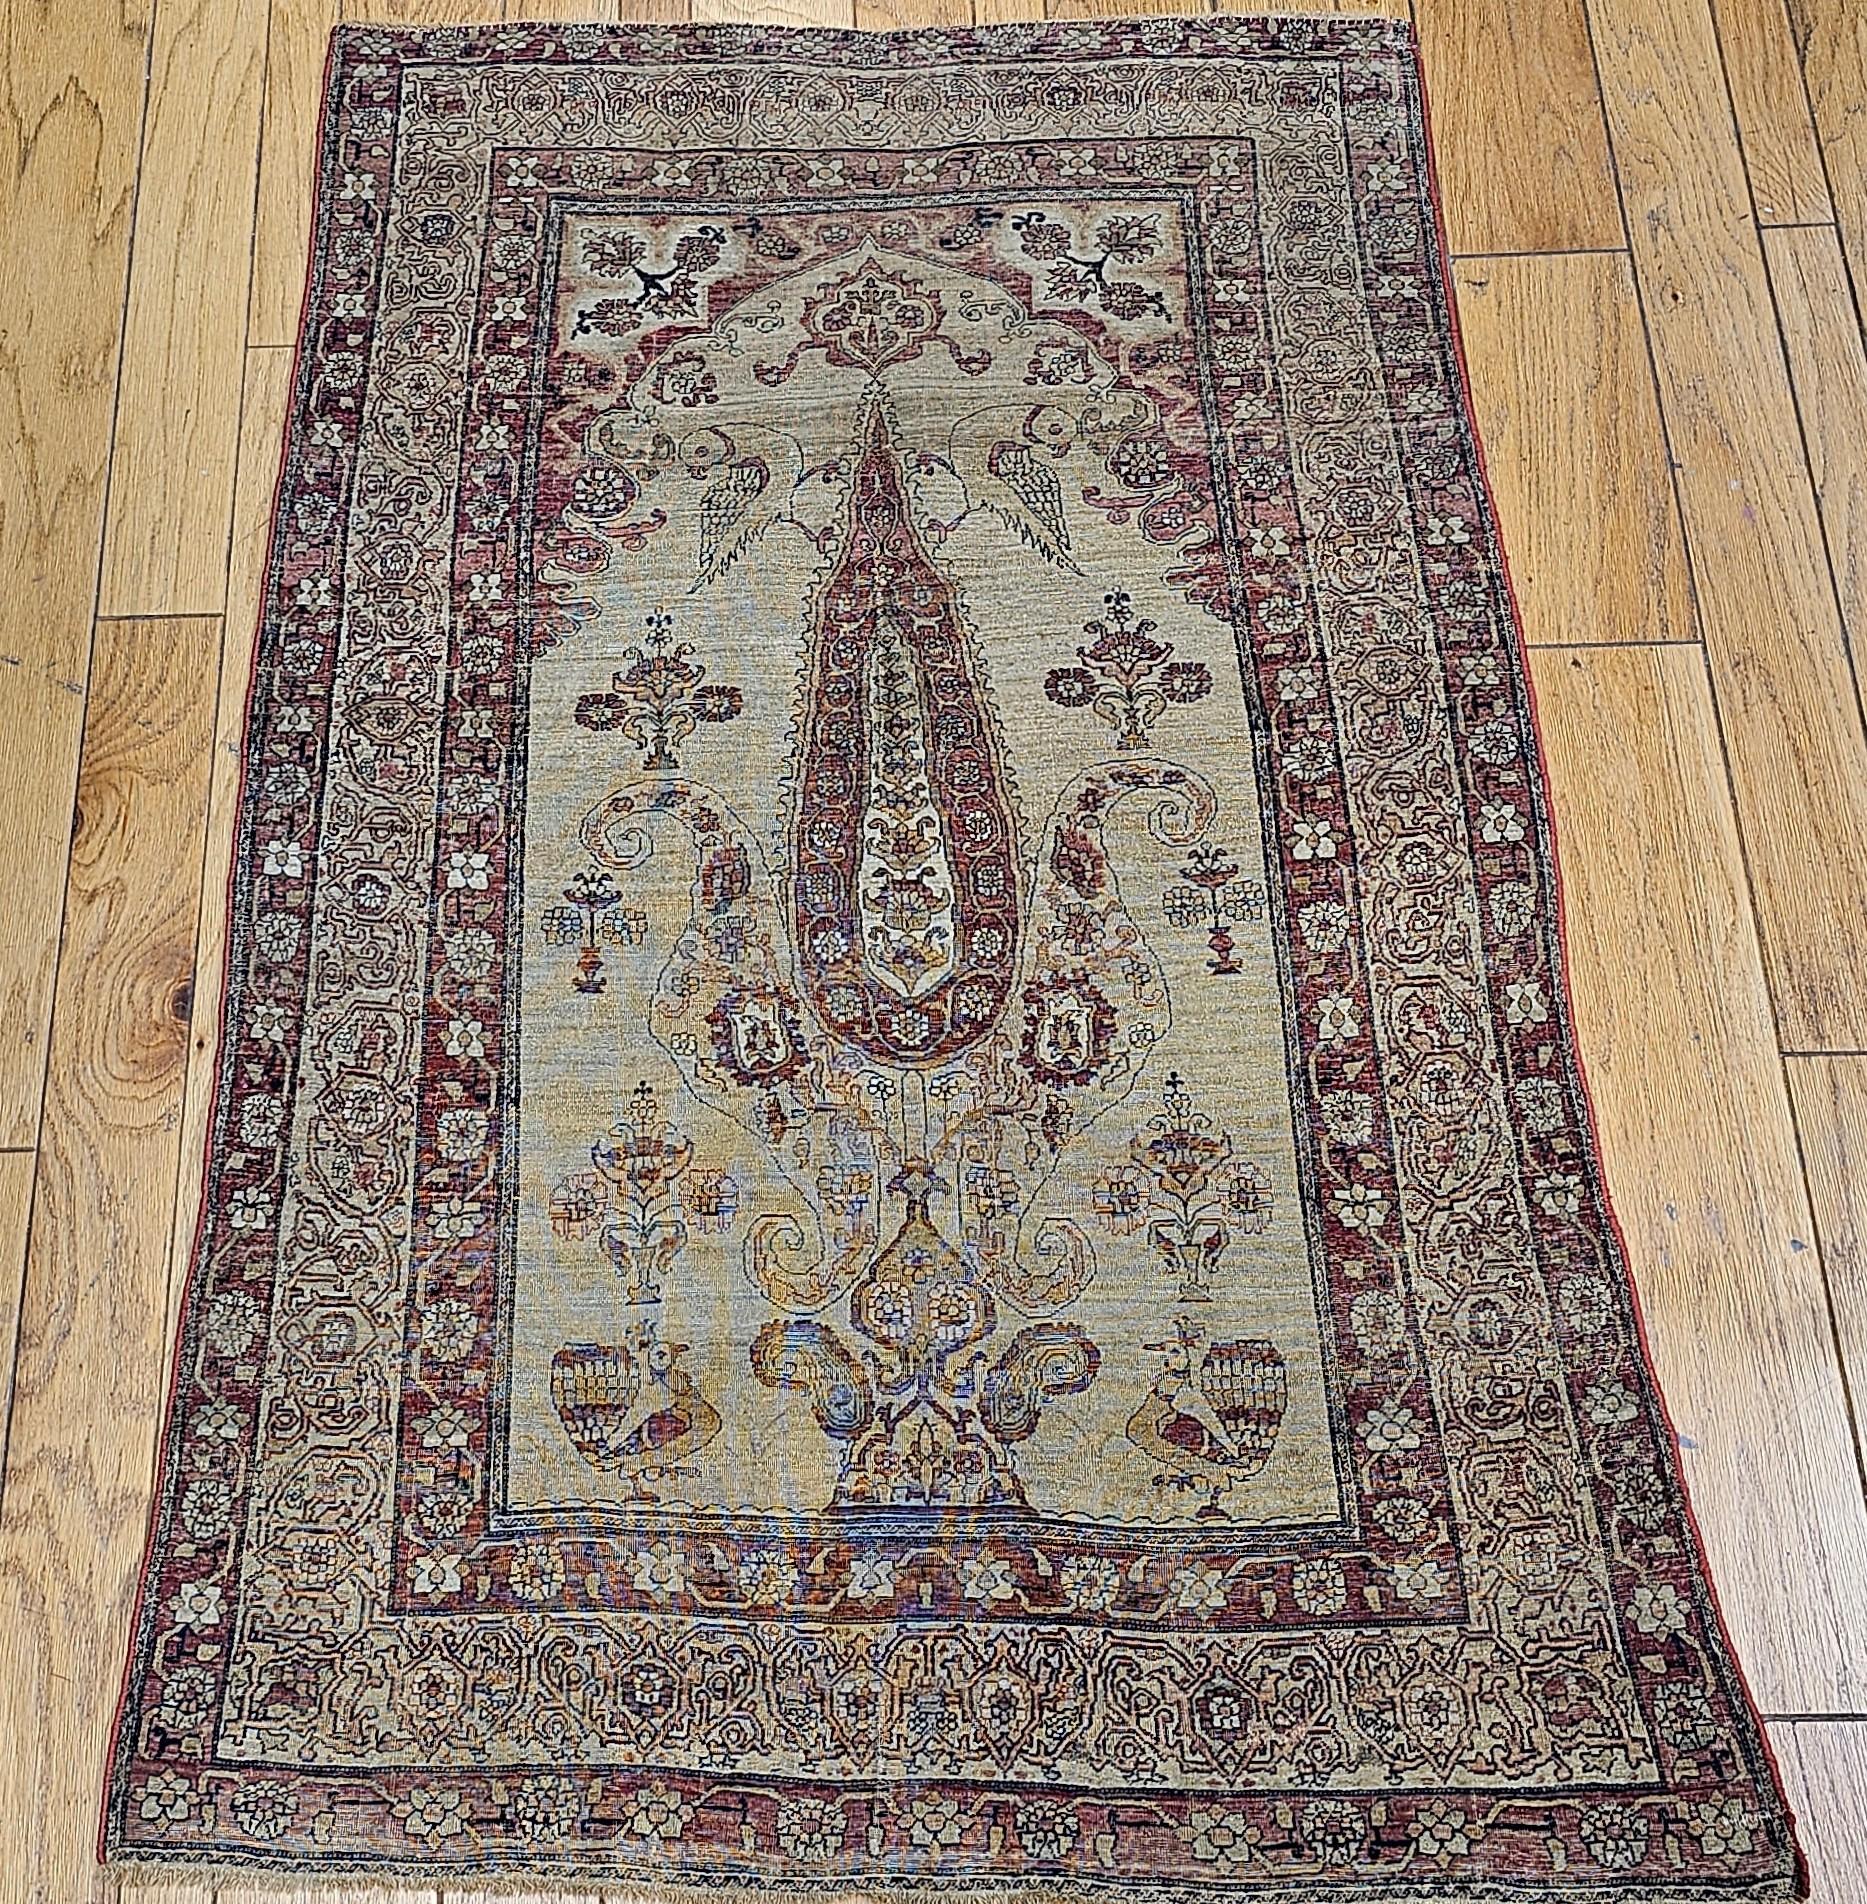 19th Century Persian Kerman Lavar Pictorial “Tree of Life” Rug in Camel, Red For Sale 7